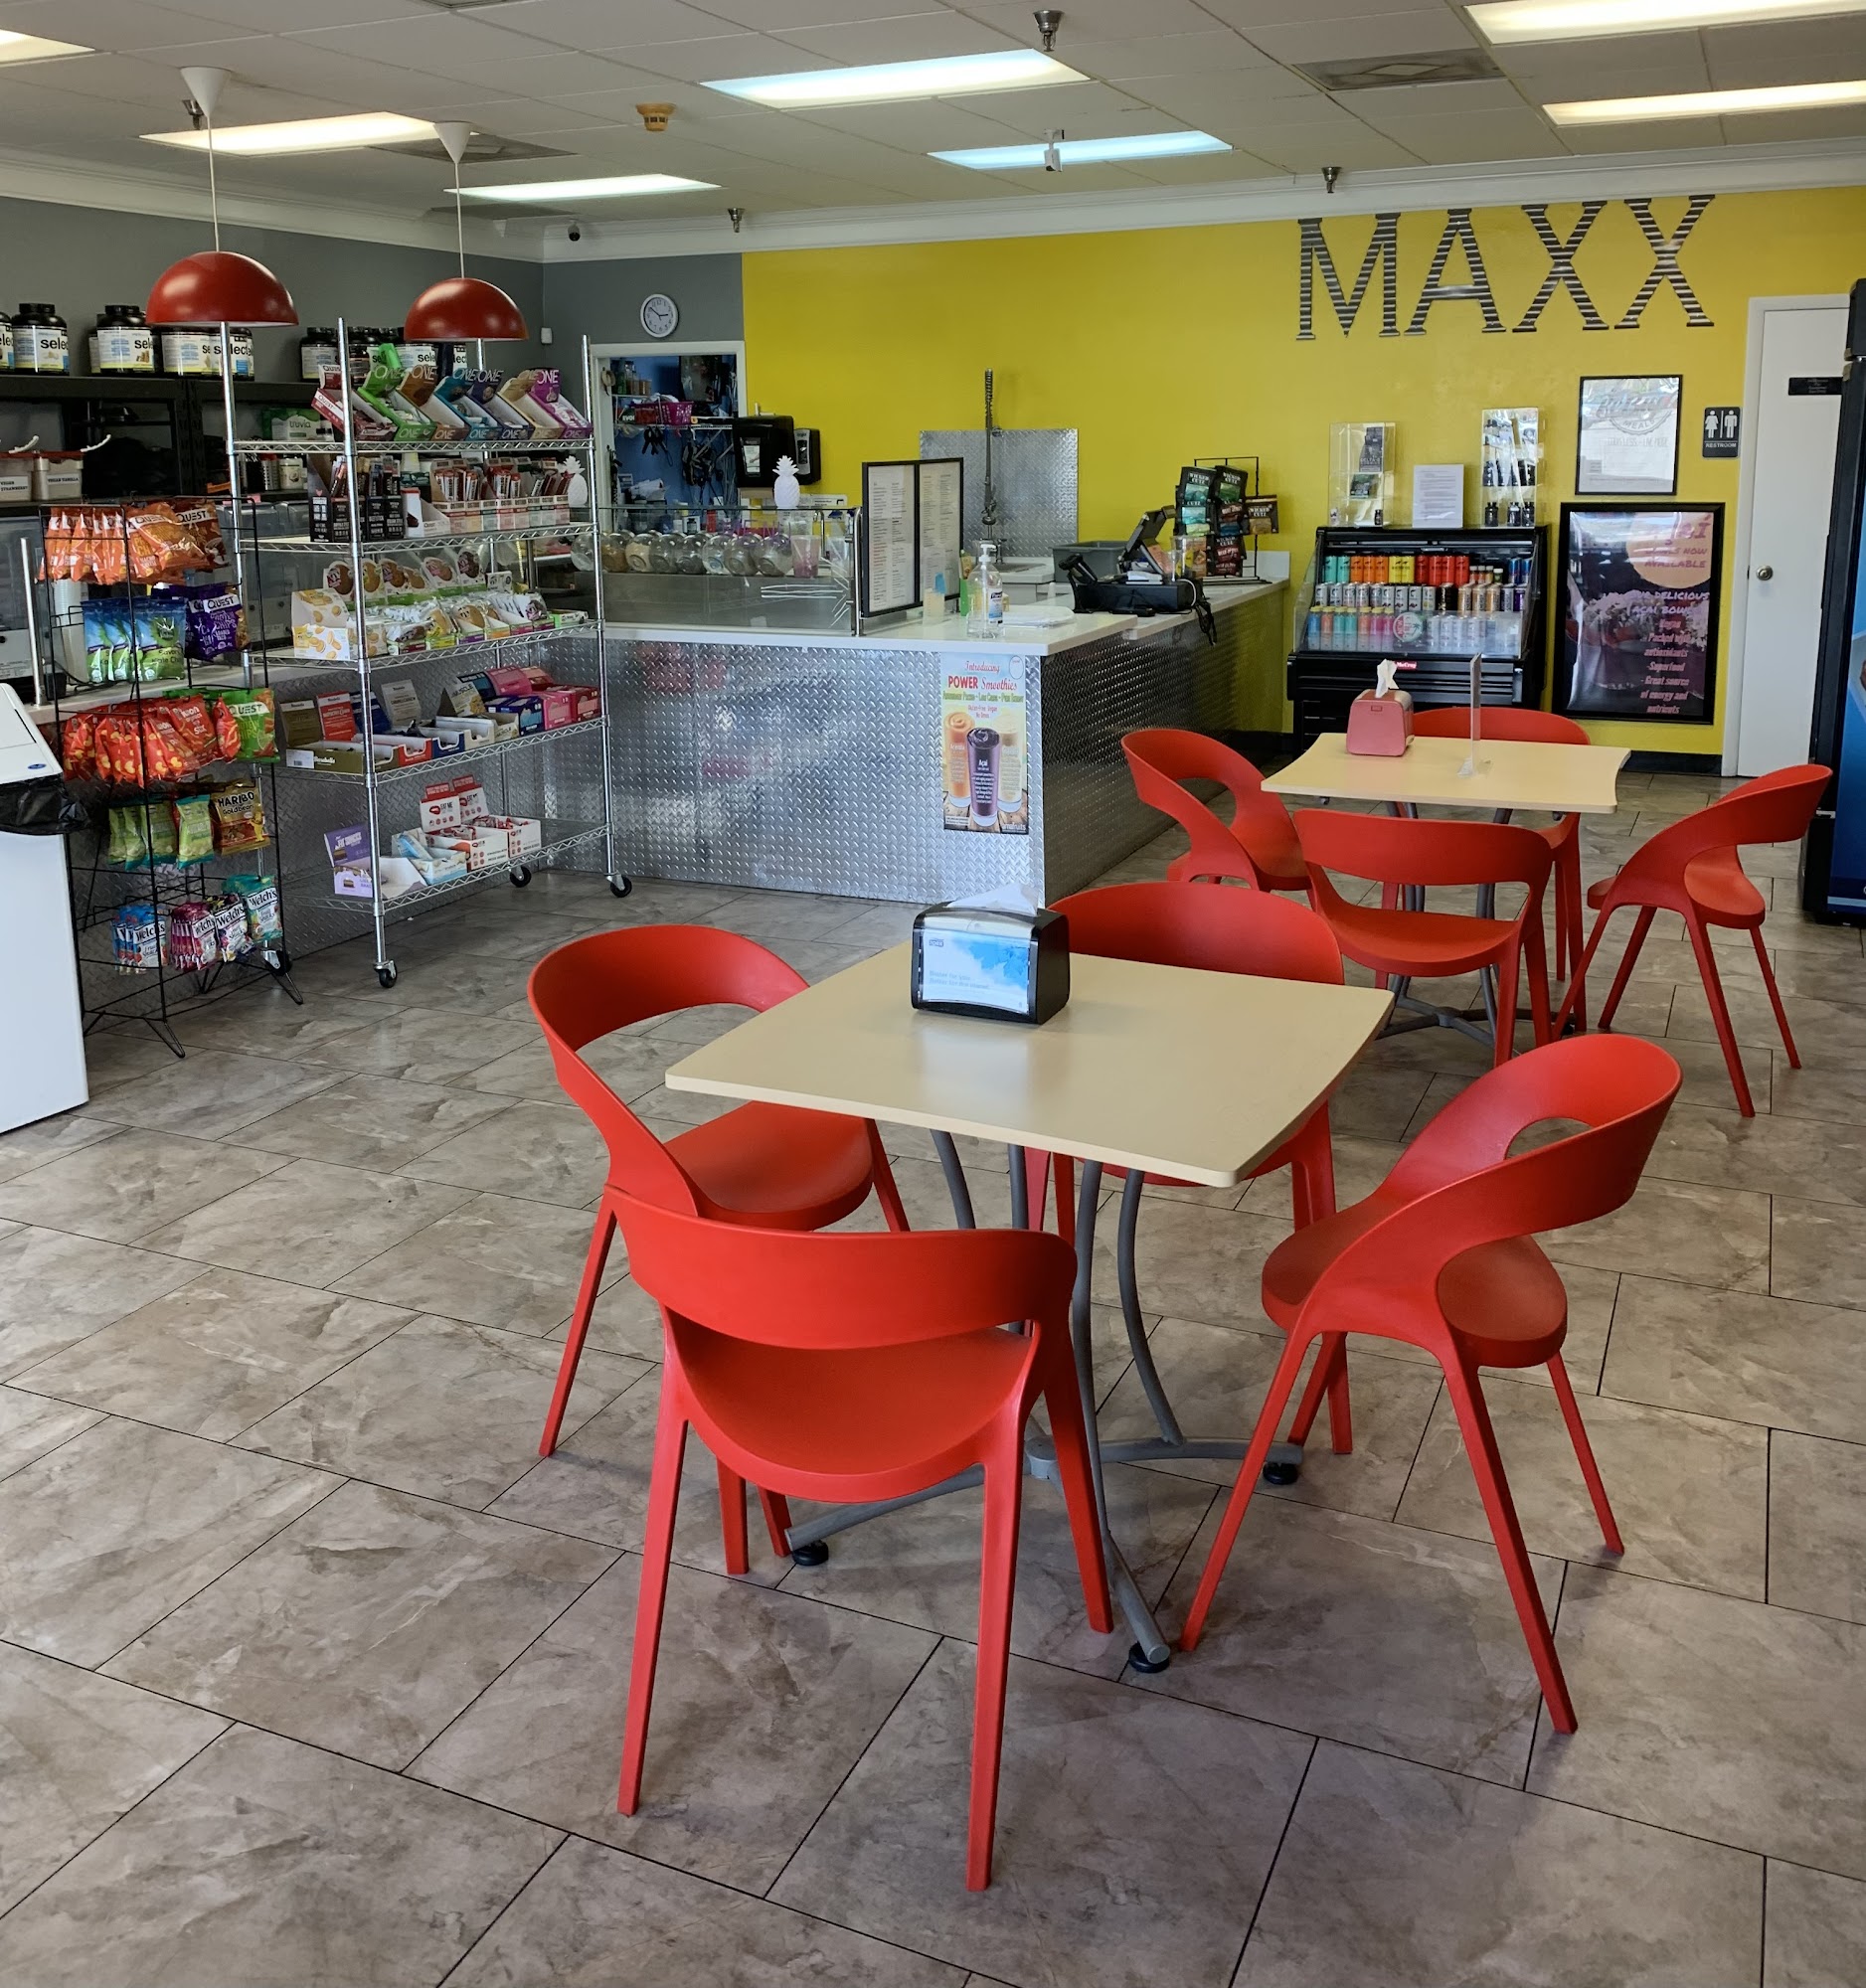 Maxx Nutrition and Smoothies